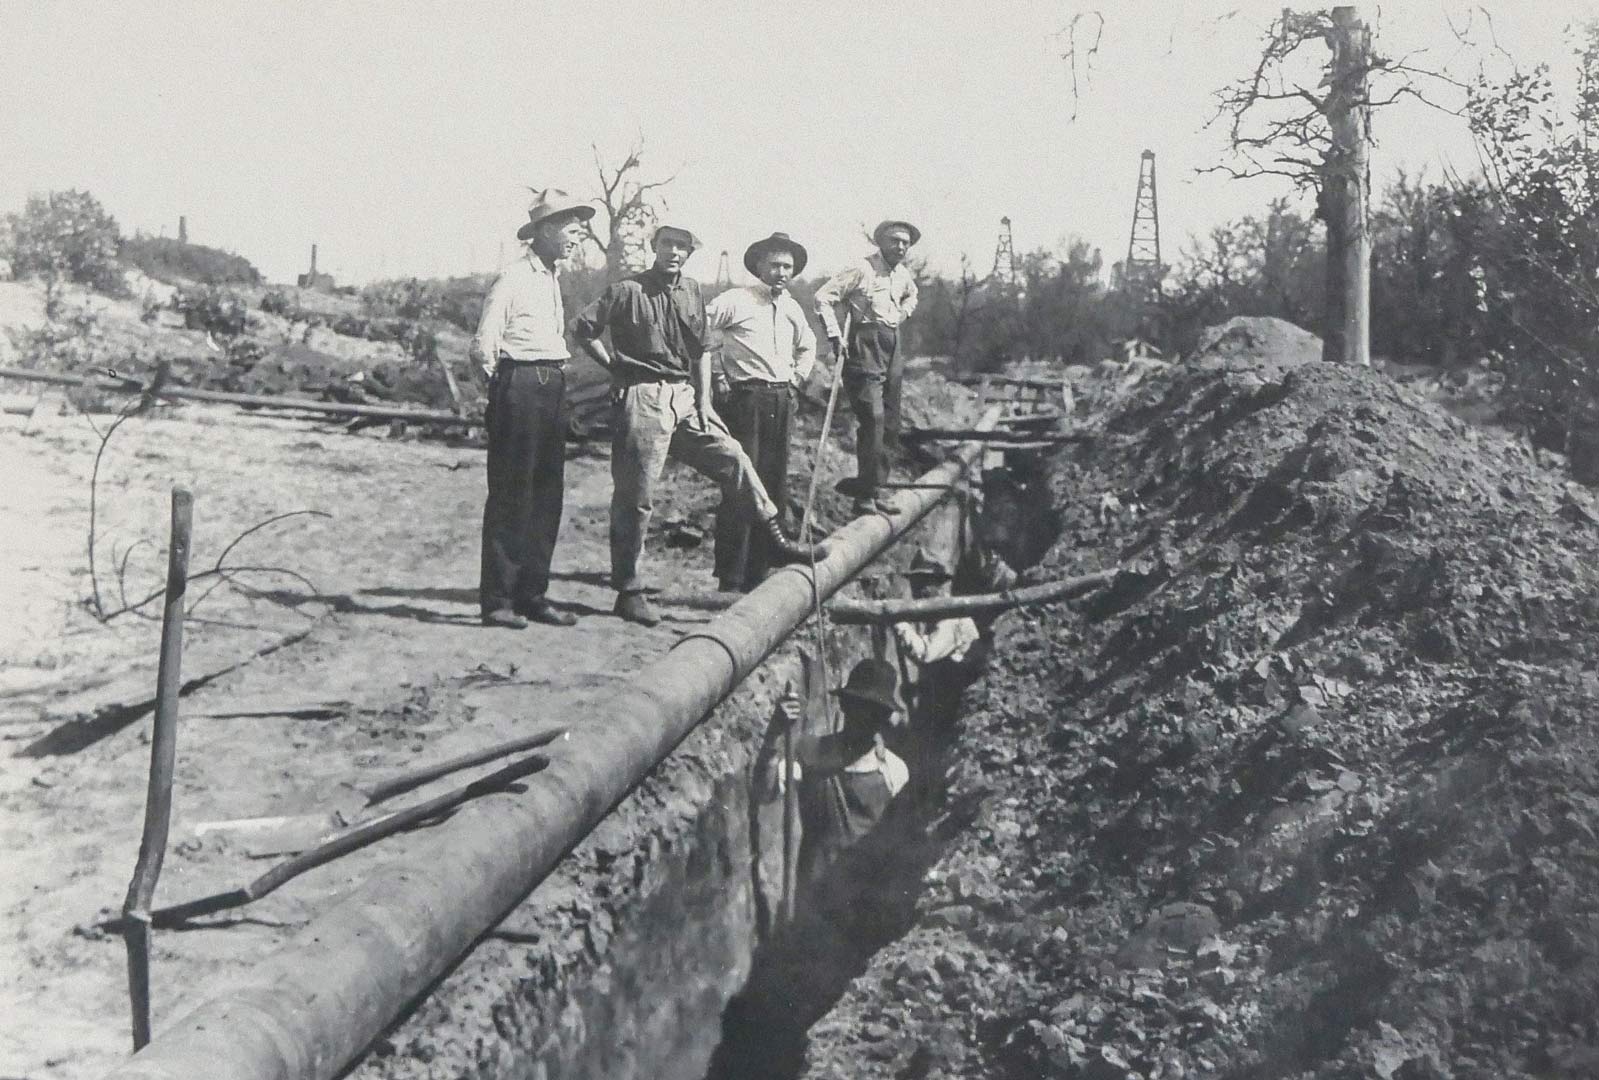 The Pick and Shovel Crew digging a pipeline ditch
Courtesy of the Petroleum Museum